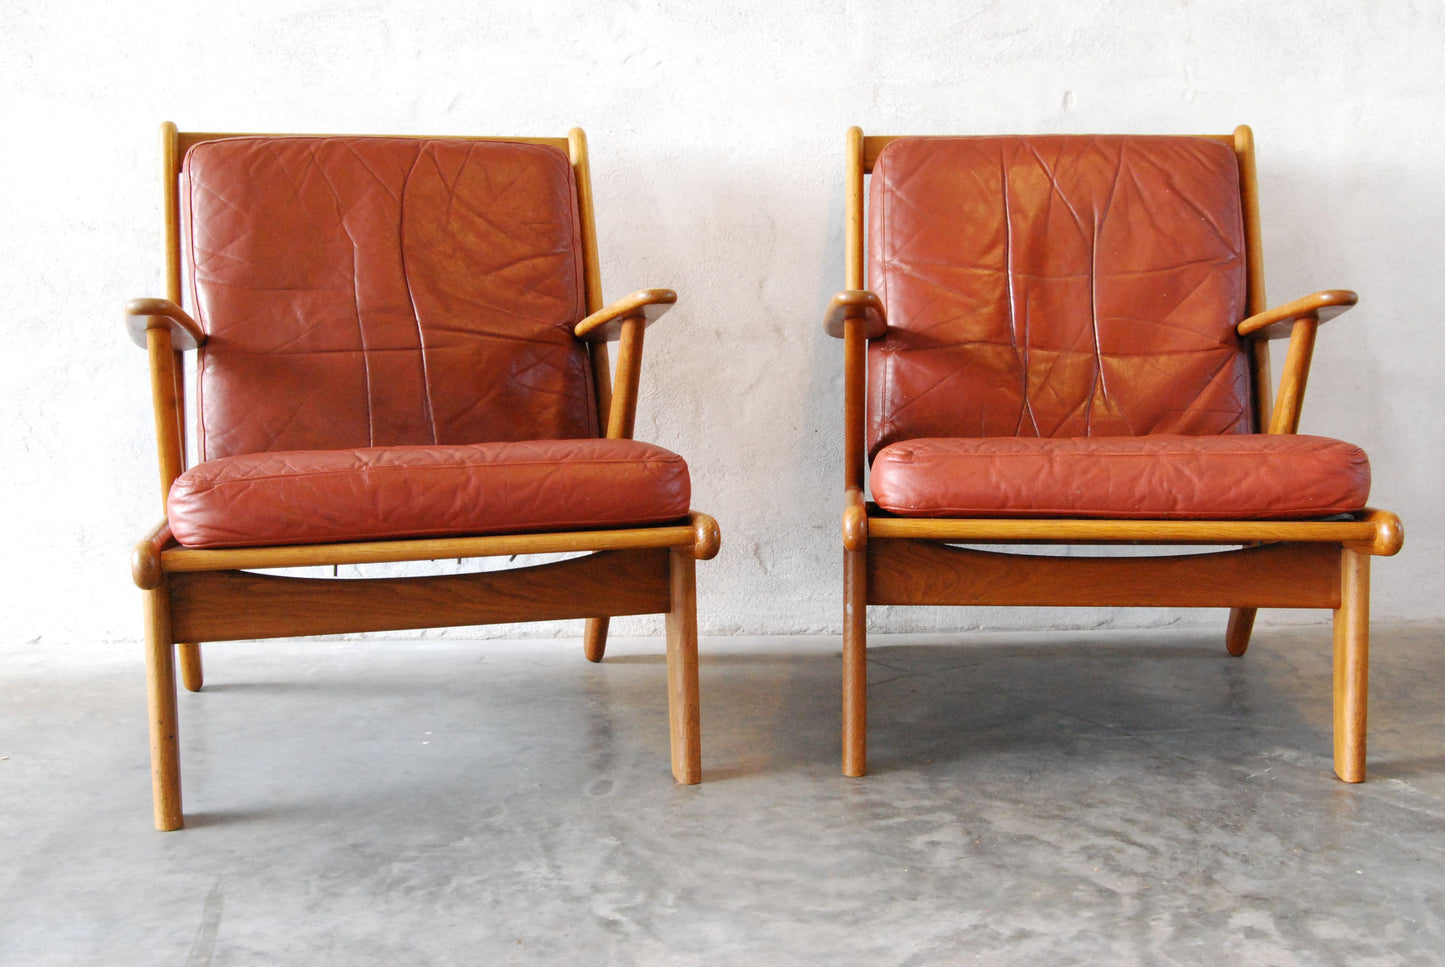 Pair of oak lounge chairs by Poul Volther